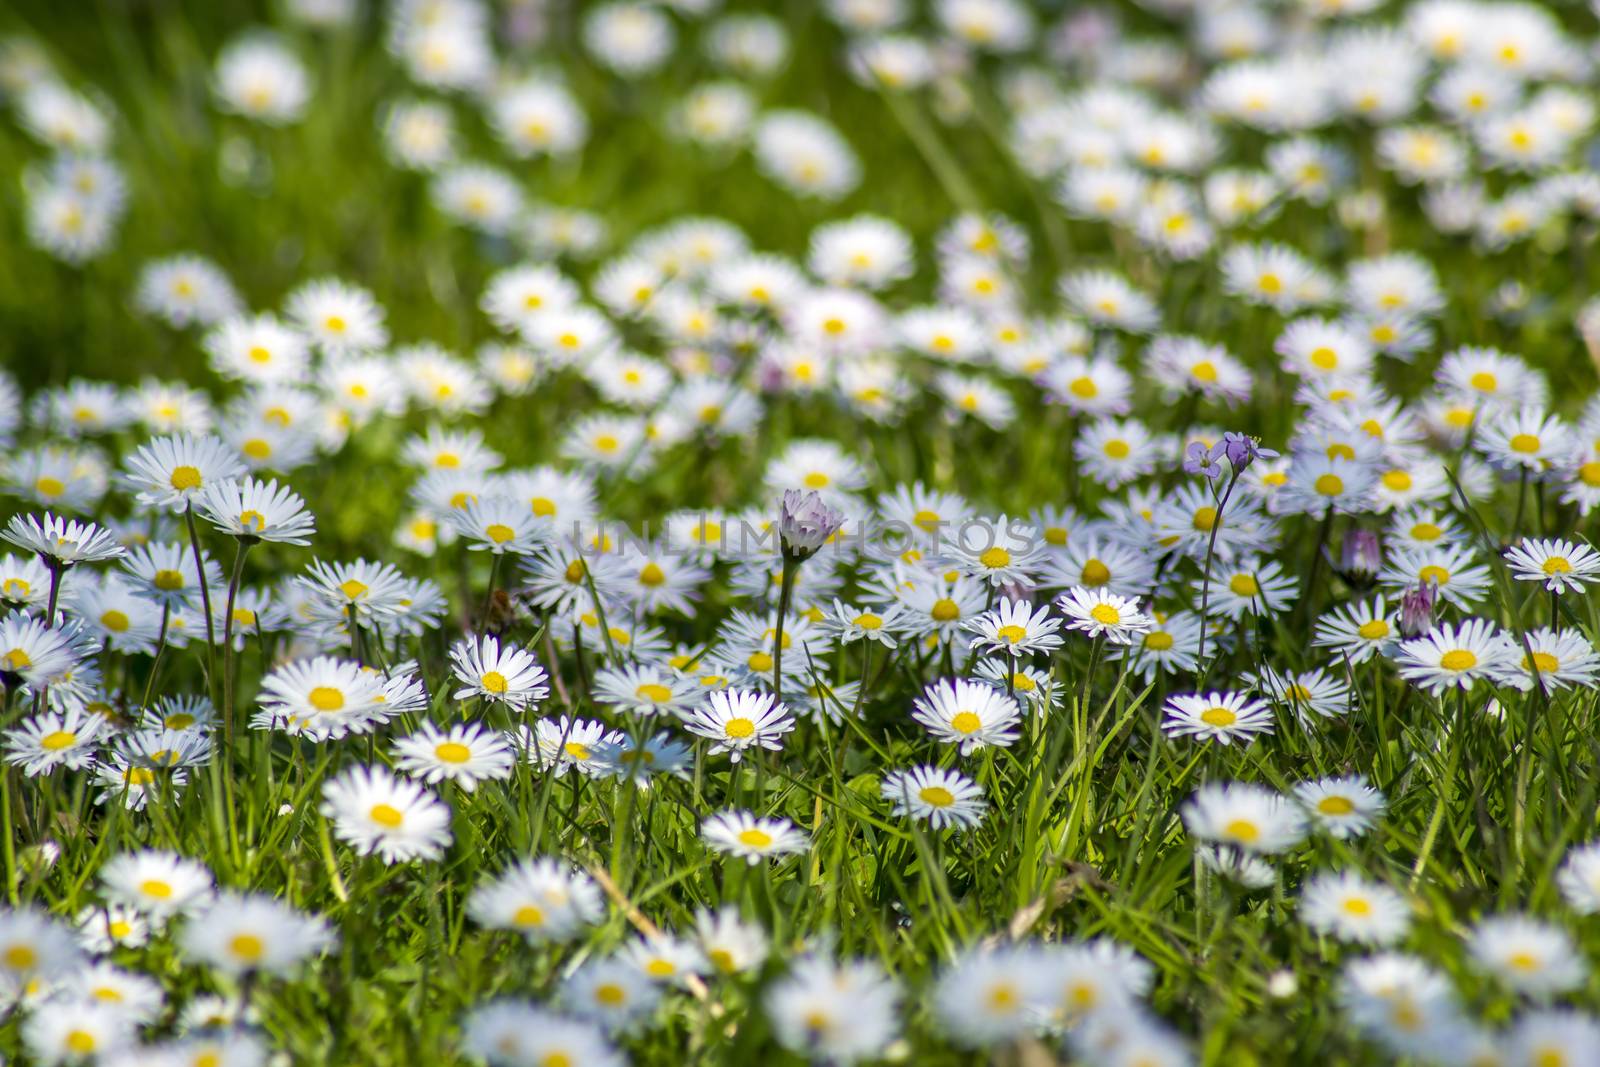 Background of blooming daisies by miradrozdowski